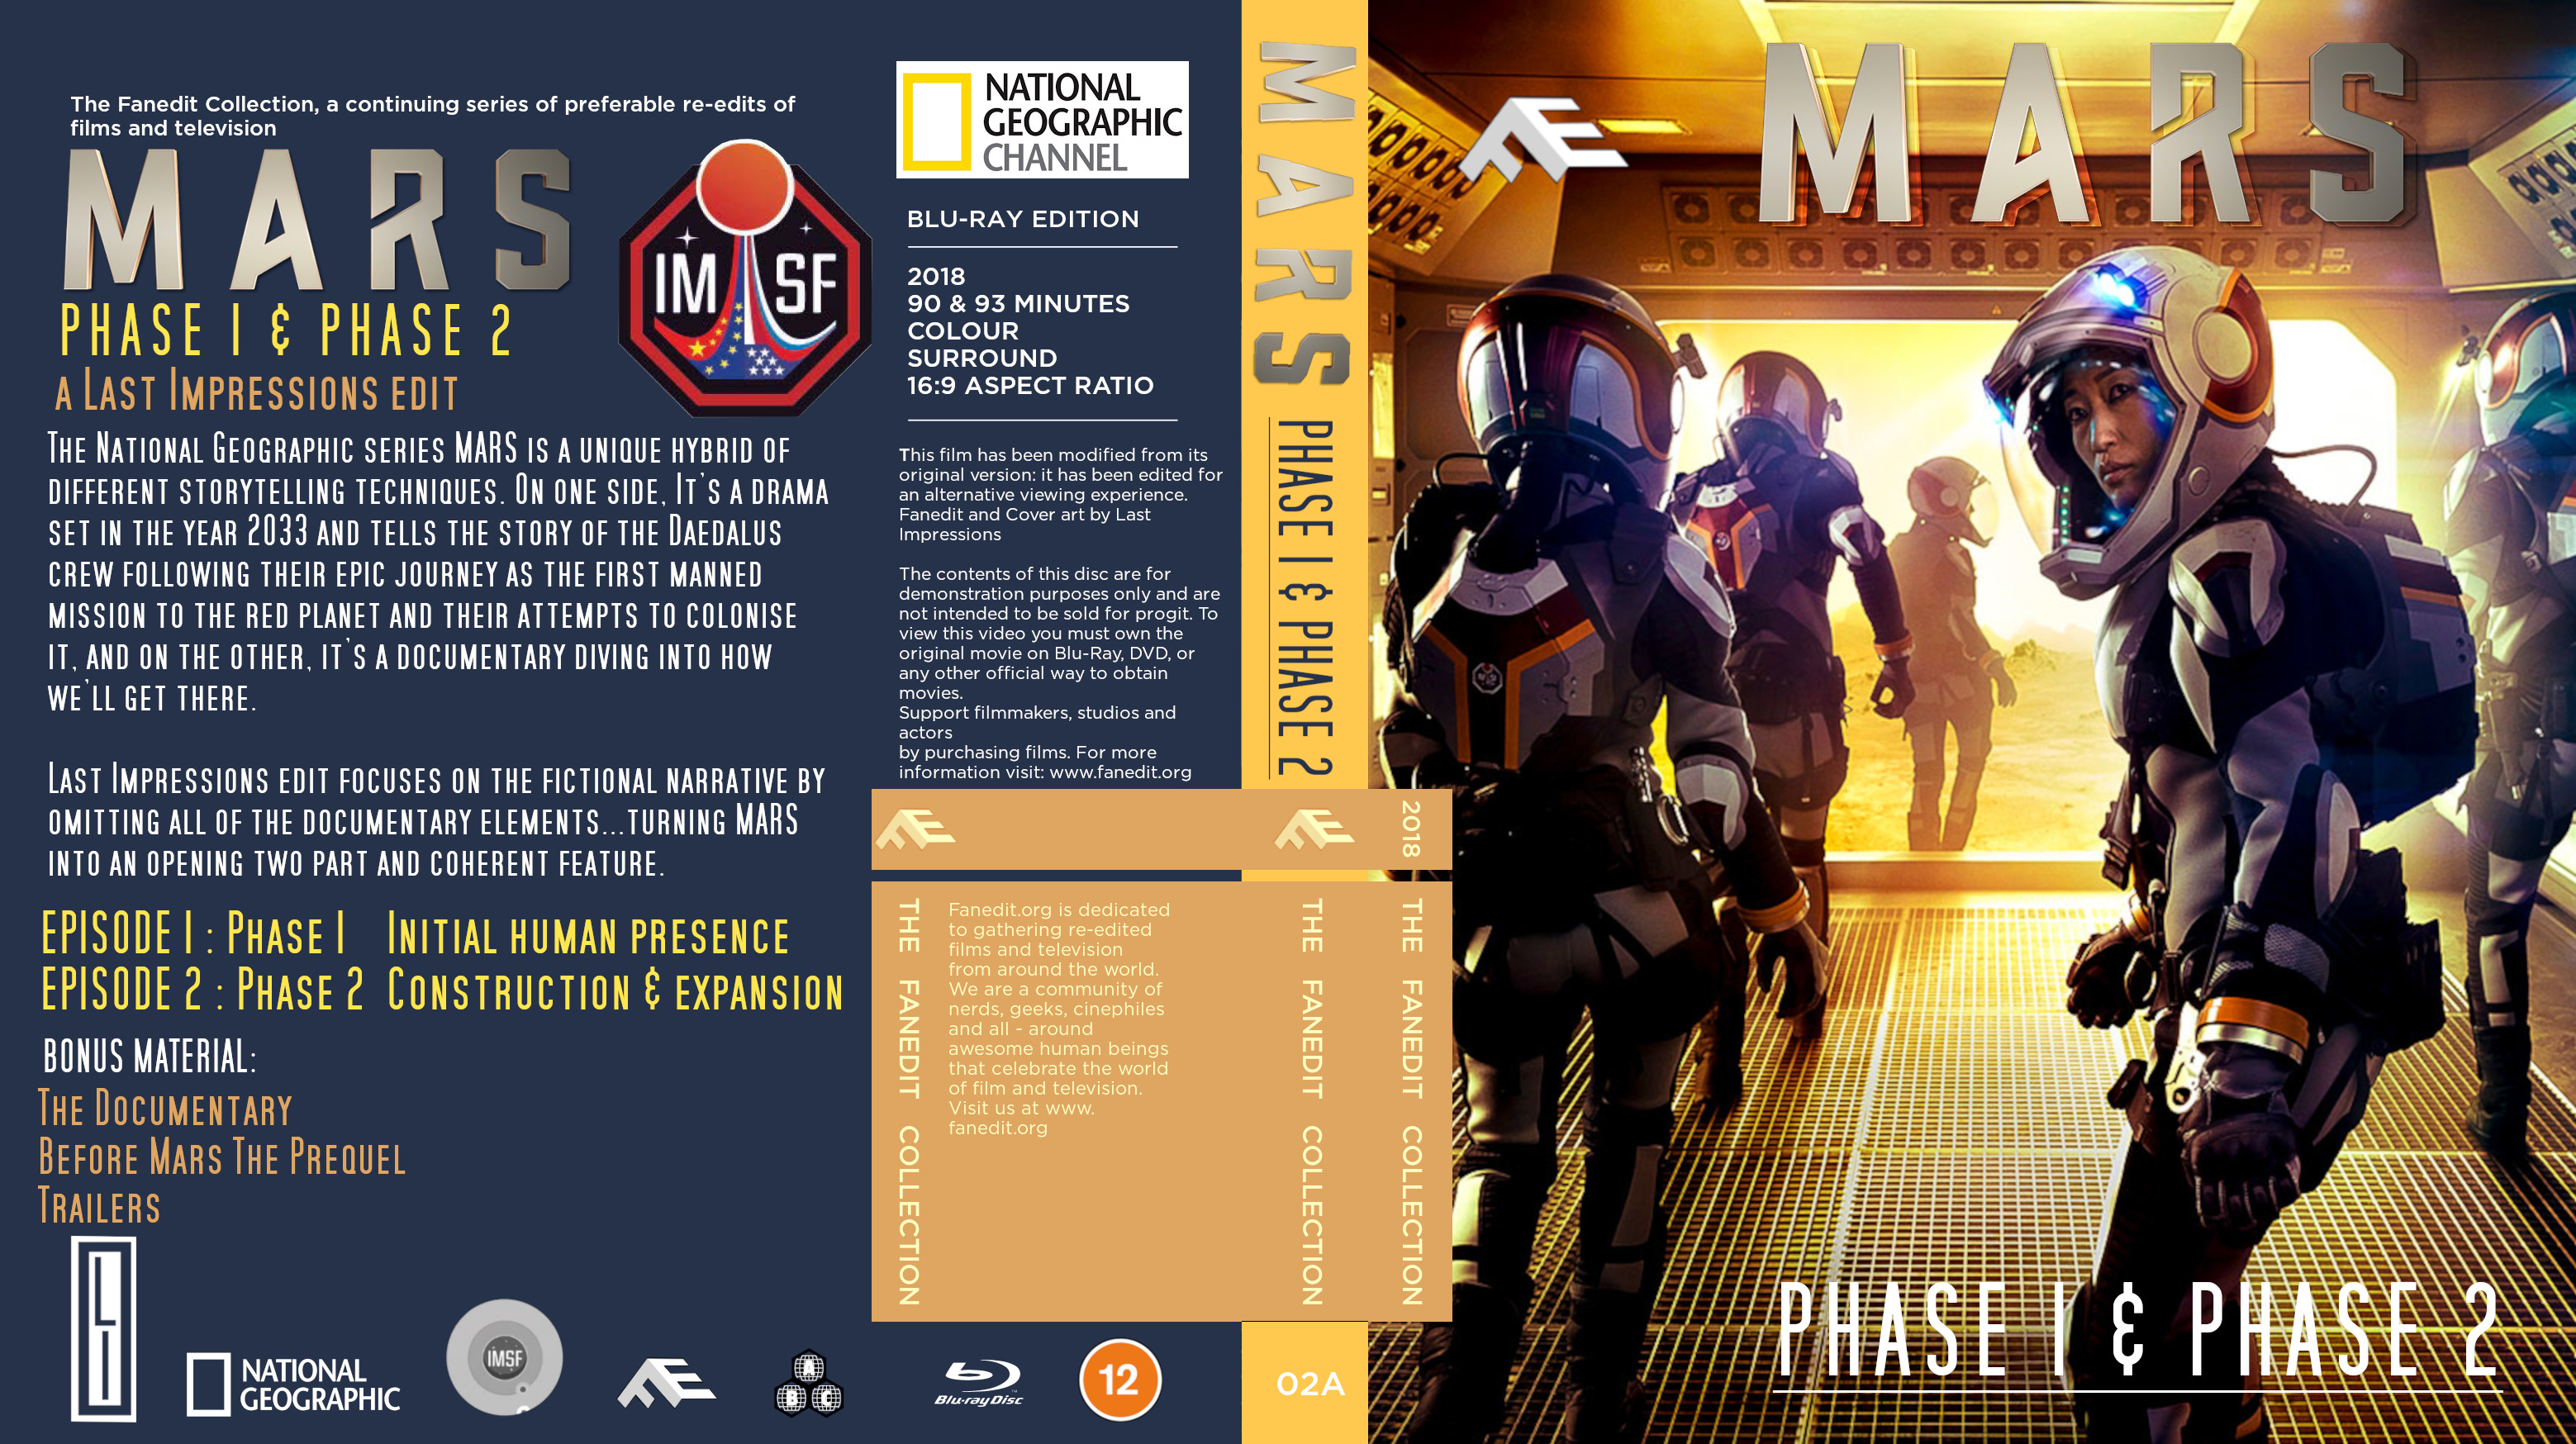 Mars Fanedit collection cover final.jpg